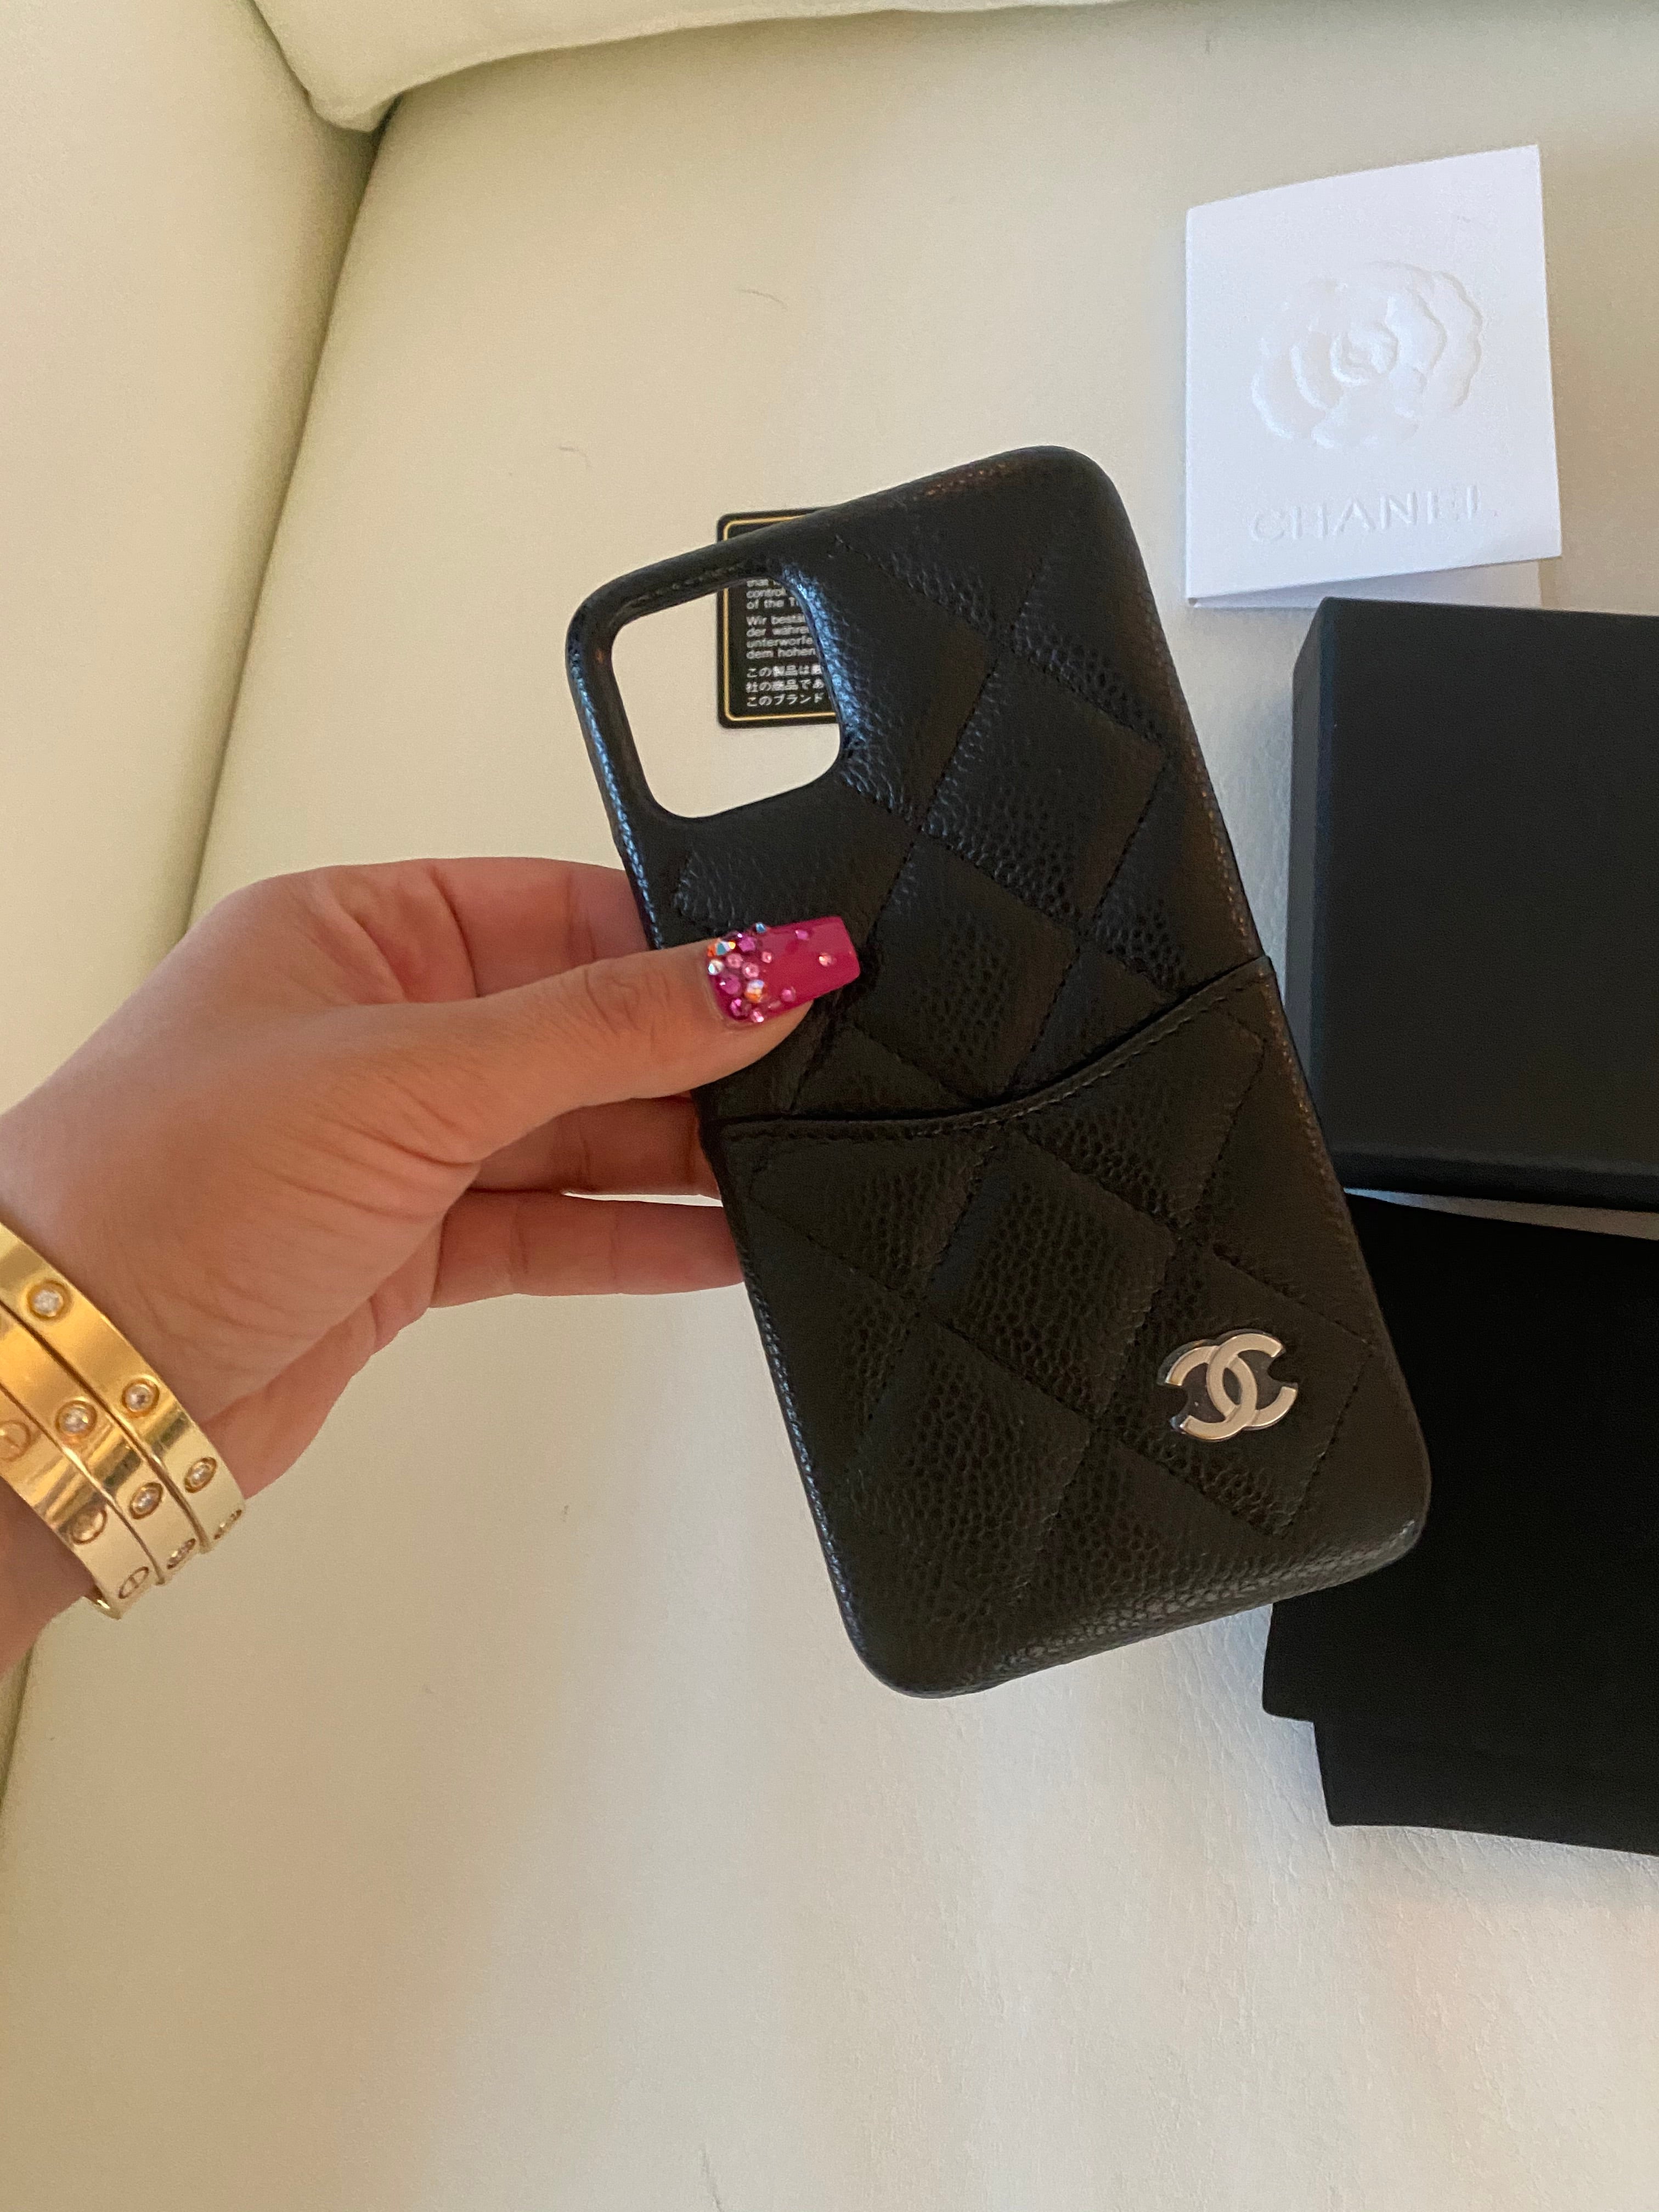 Chanel Case Iphone 11 Pro Max Beccas Bags Boutique